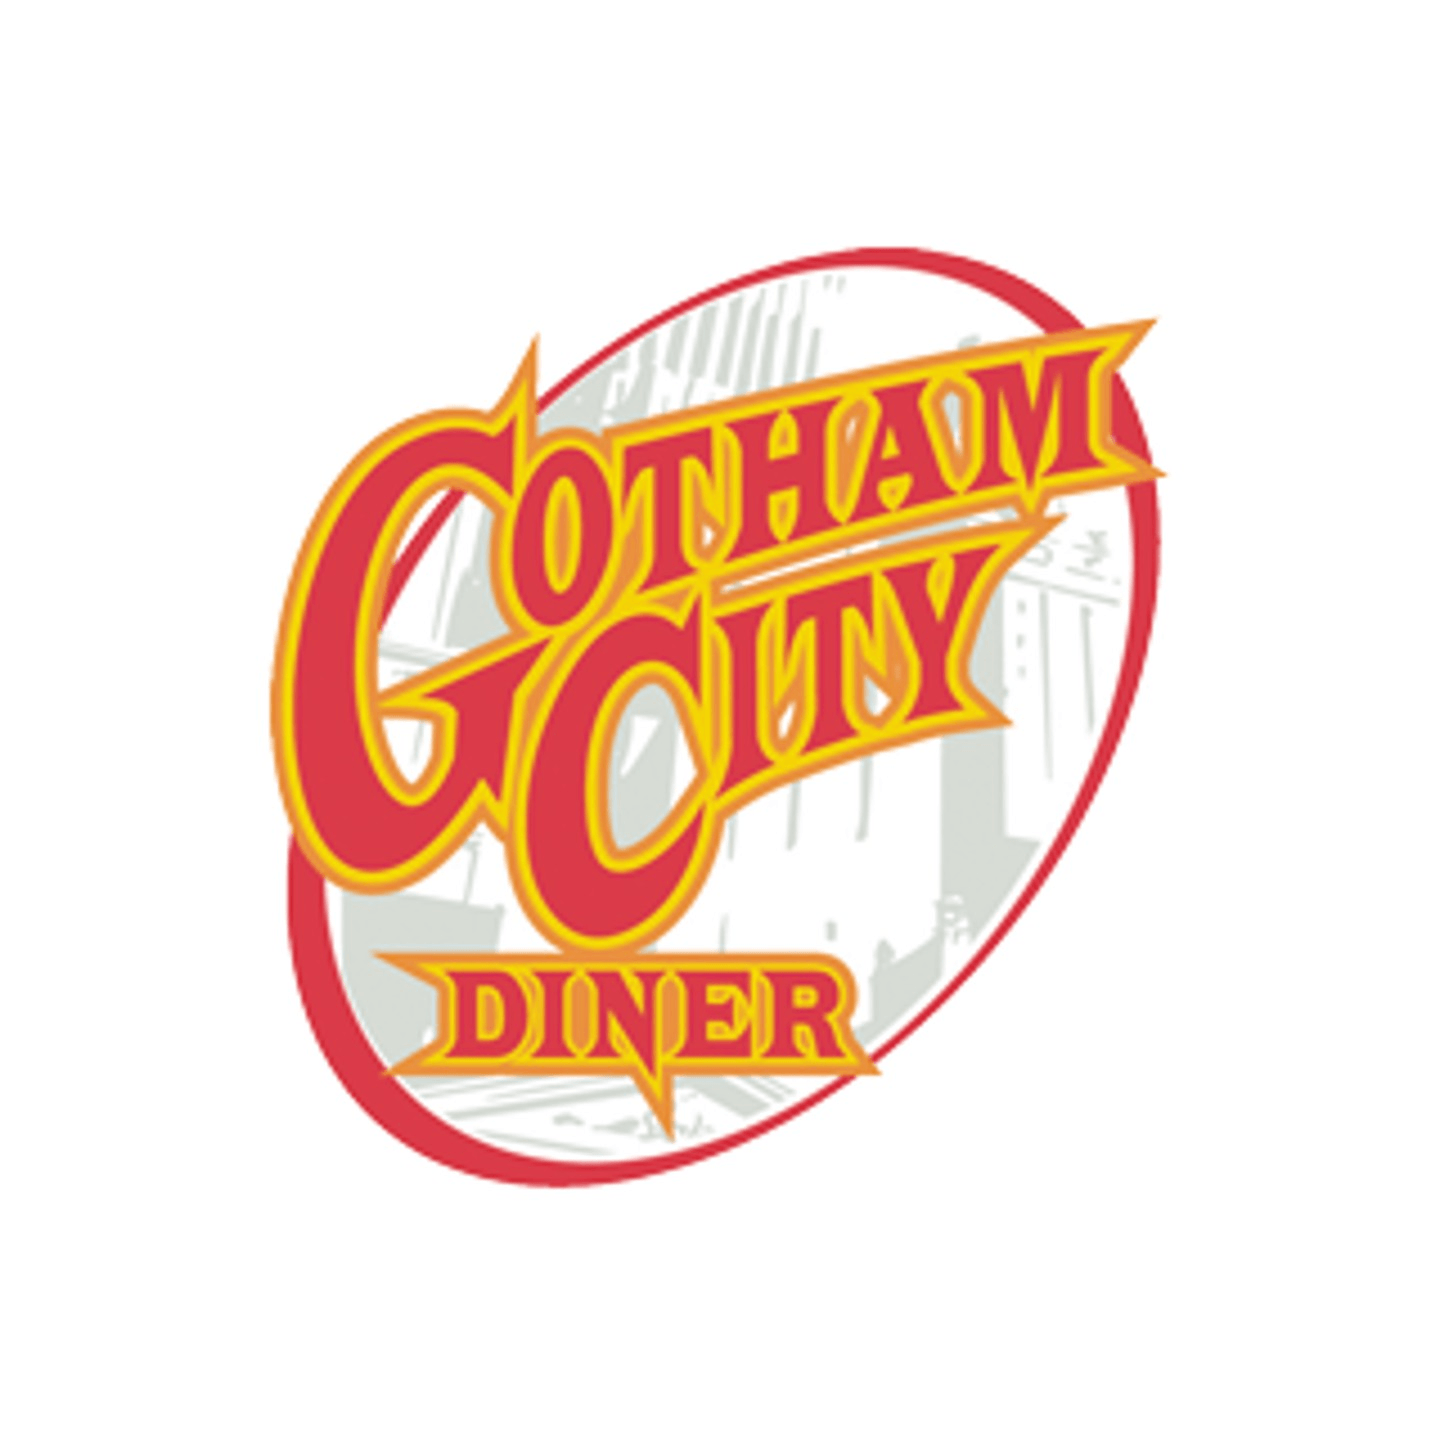 Welcome to Gotham City Diner!